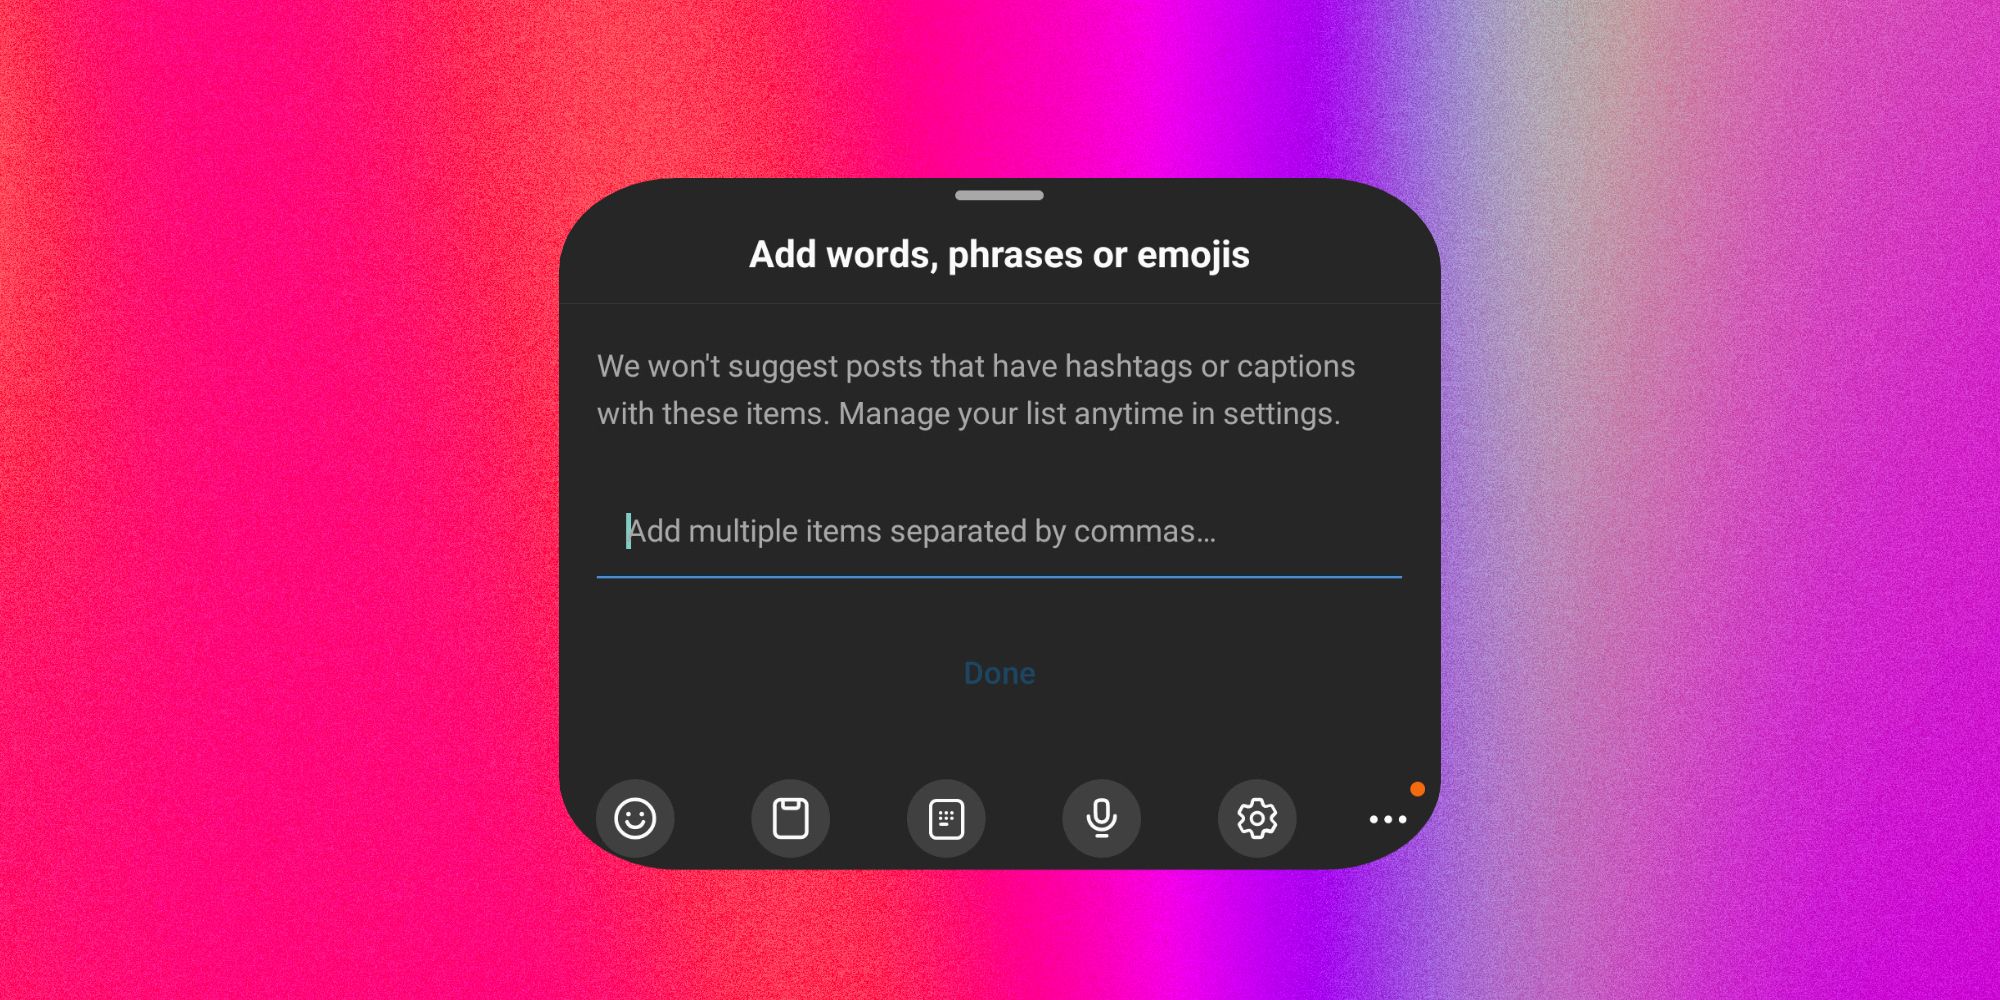 A dialogue box giving users the option to specify words, phrases, or emoji they want to exclude from their Reels suggestions